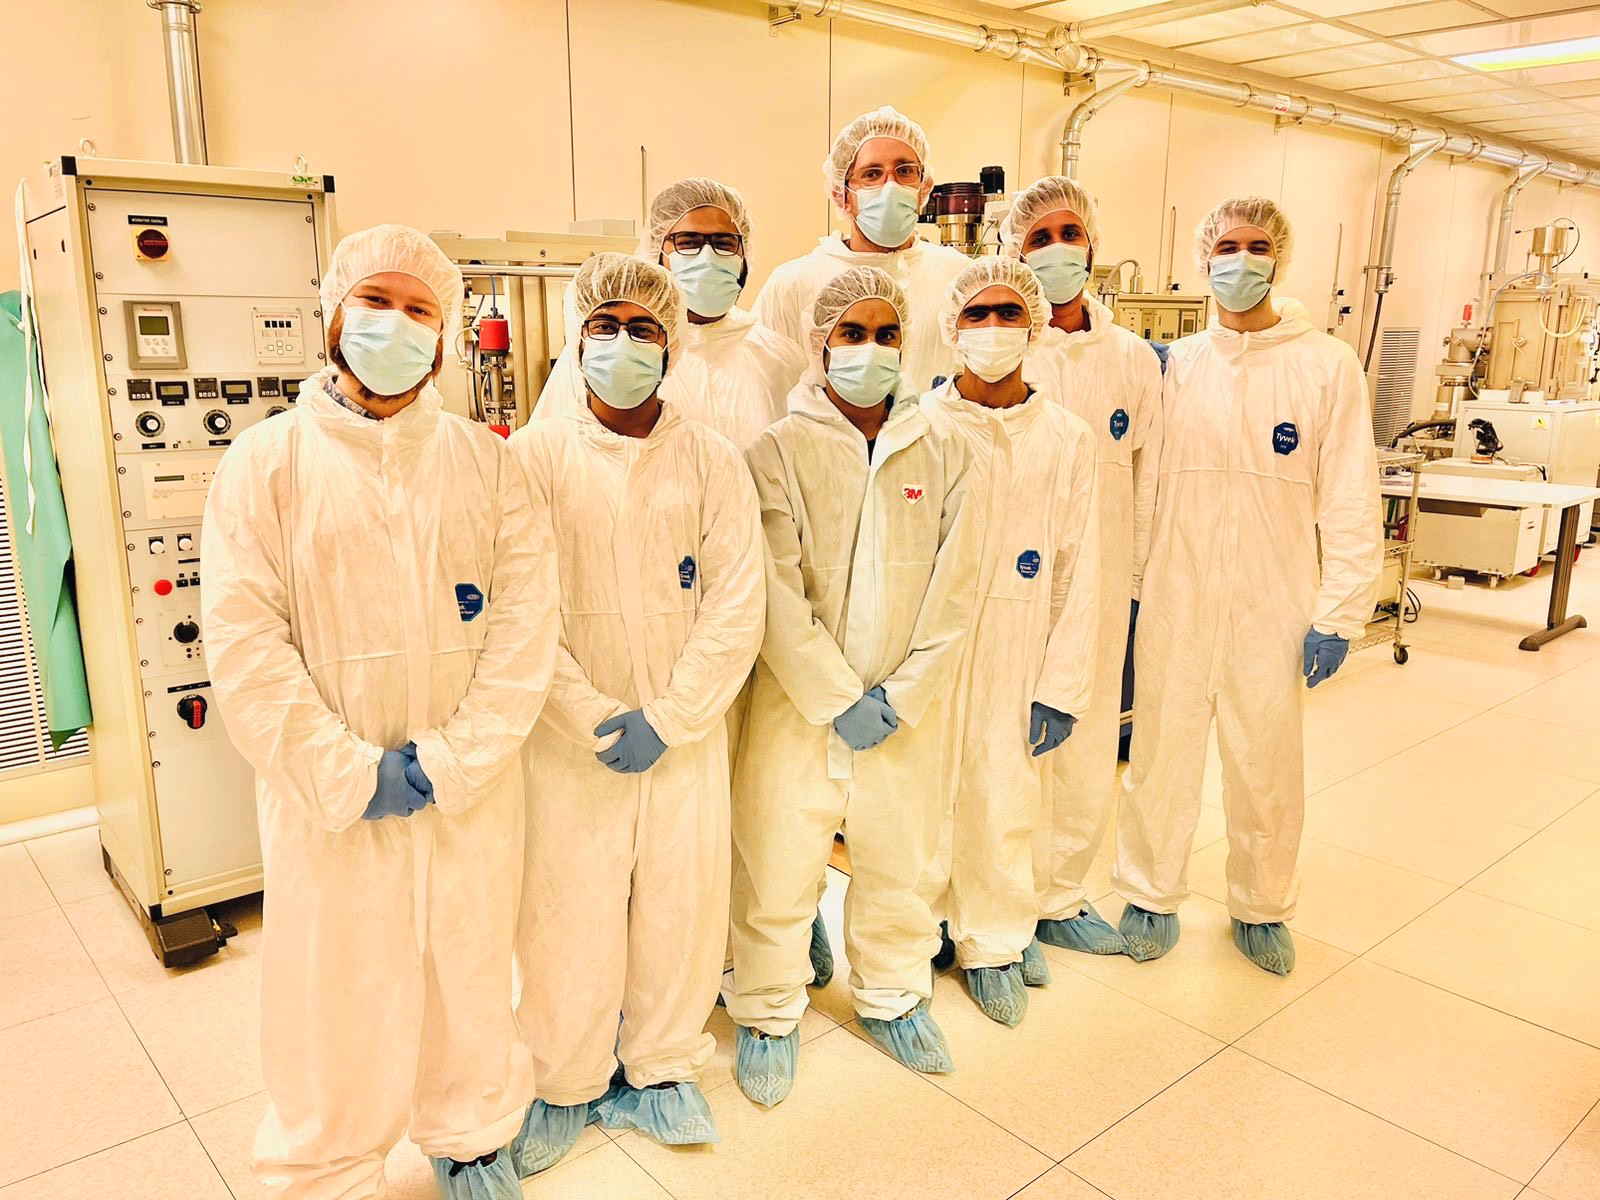 M2 PSRS students at Poltecnico di Torino in Trustech cleanroom